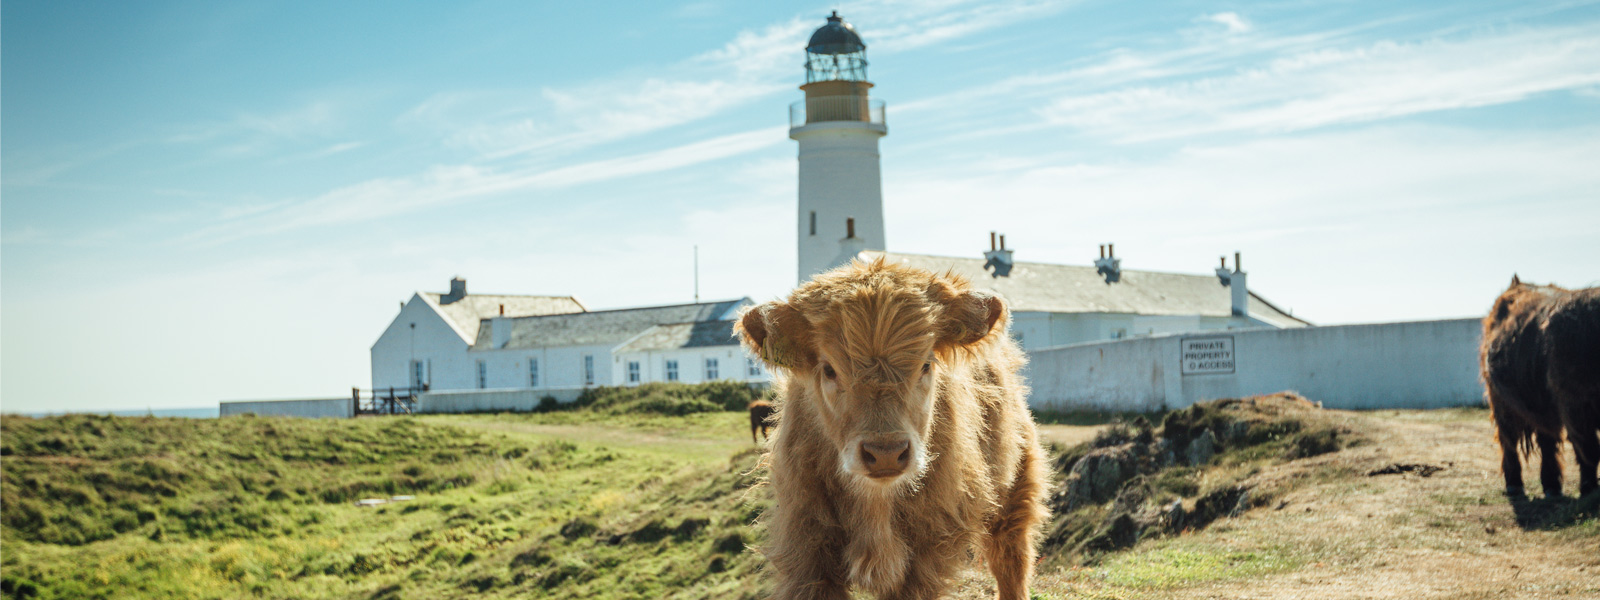 A local highland cow infront of Langness Lighthouse